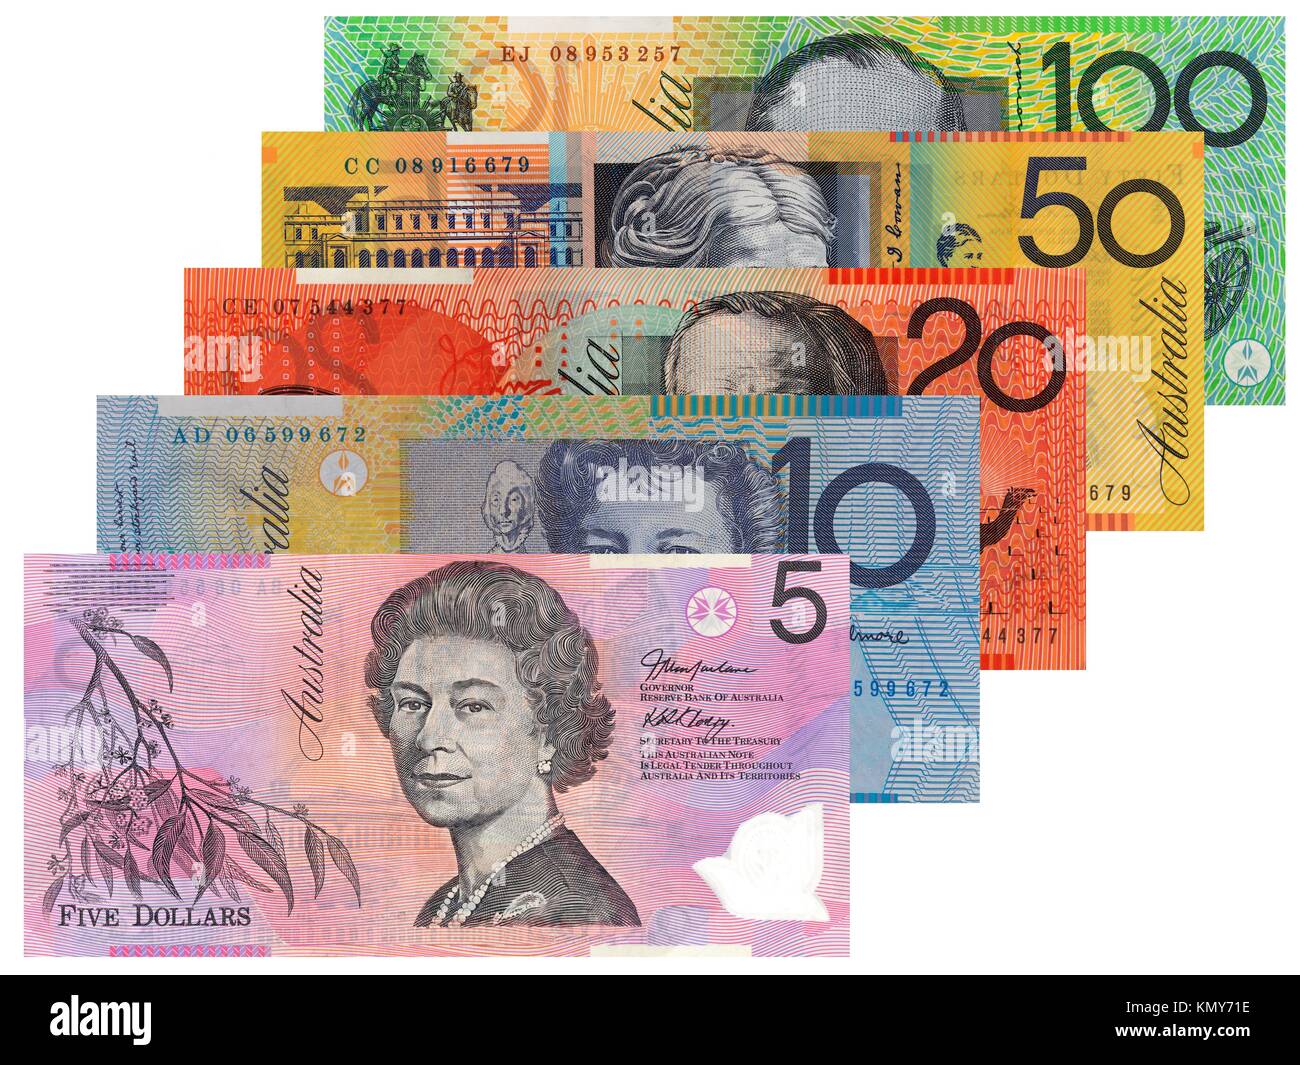 Australian Currency High Resolution Stock Photography and Images - Alamy